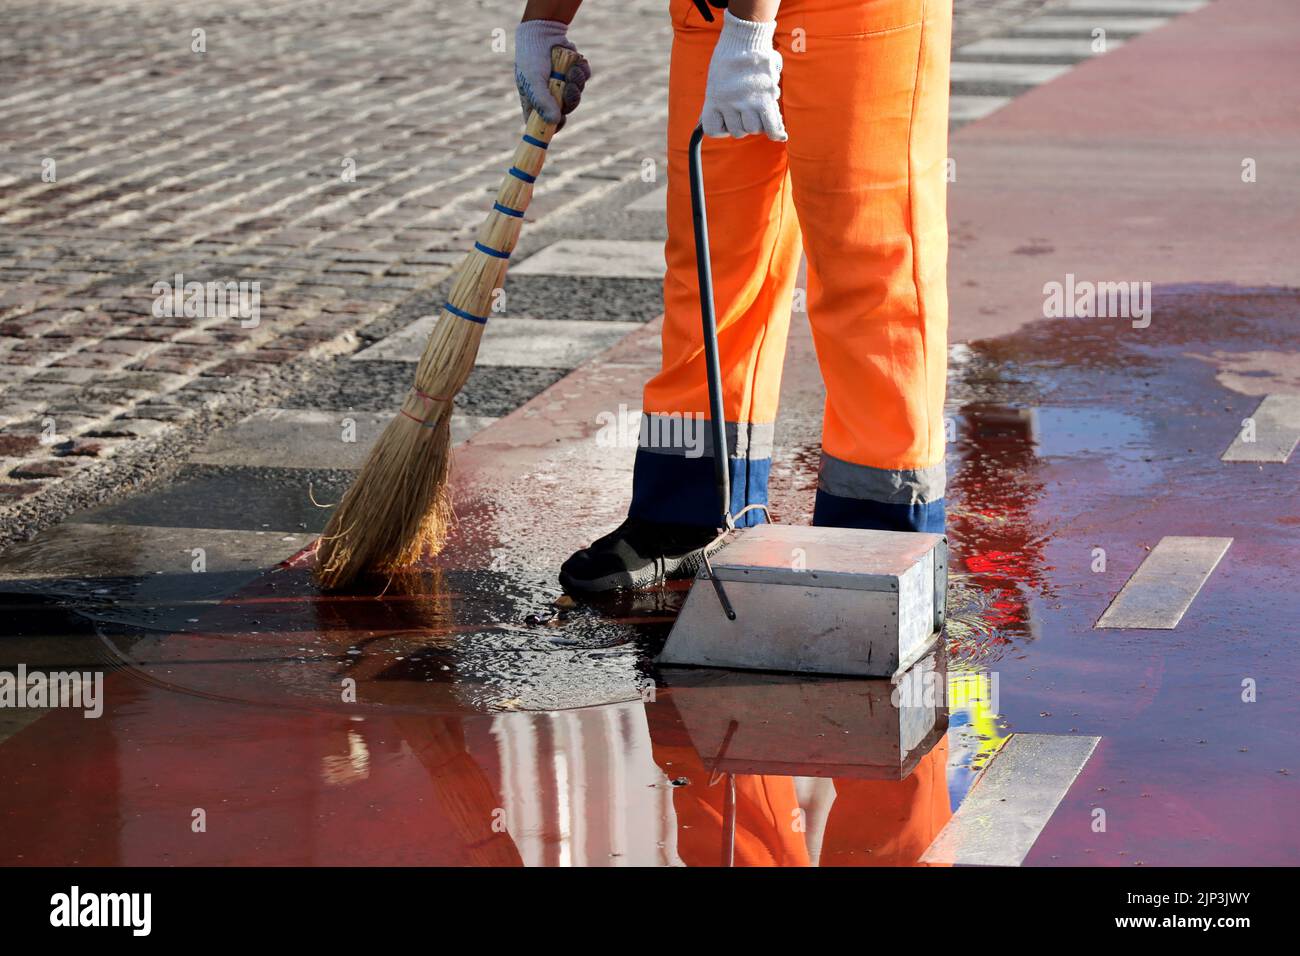 Janitor cleaning wet city road. Legs of street sweeper with broom in a puddle Stock Photo